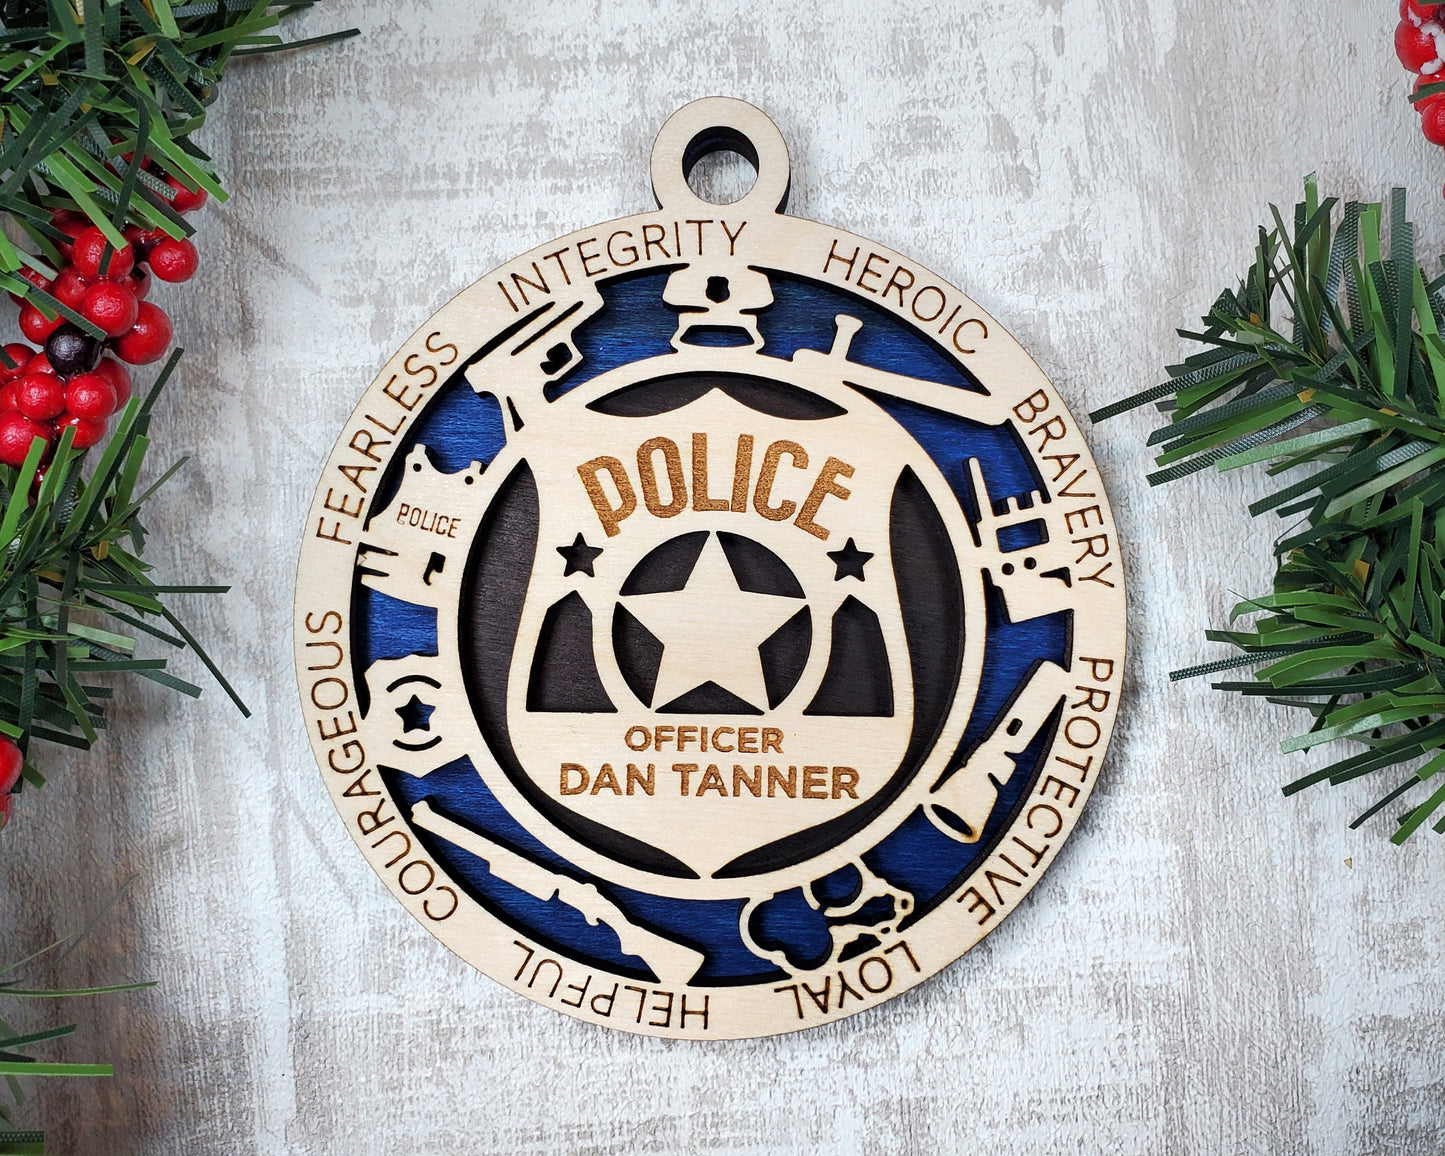 Police Ornament, Cop Ornament, Thin Blue Line GIft, FIrst Responder Onament, Detective Ornament, Police Gifts, Cop Christmas Gift